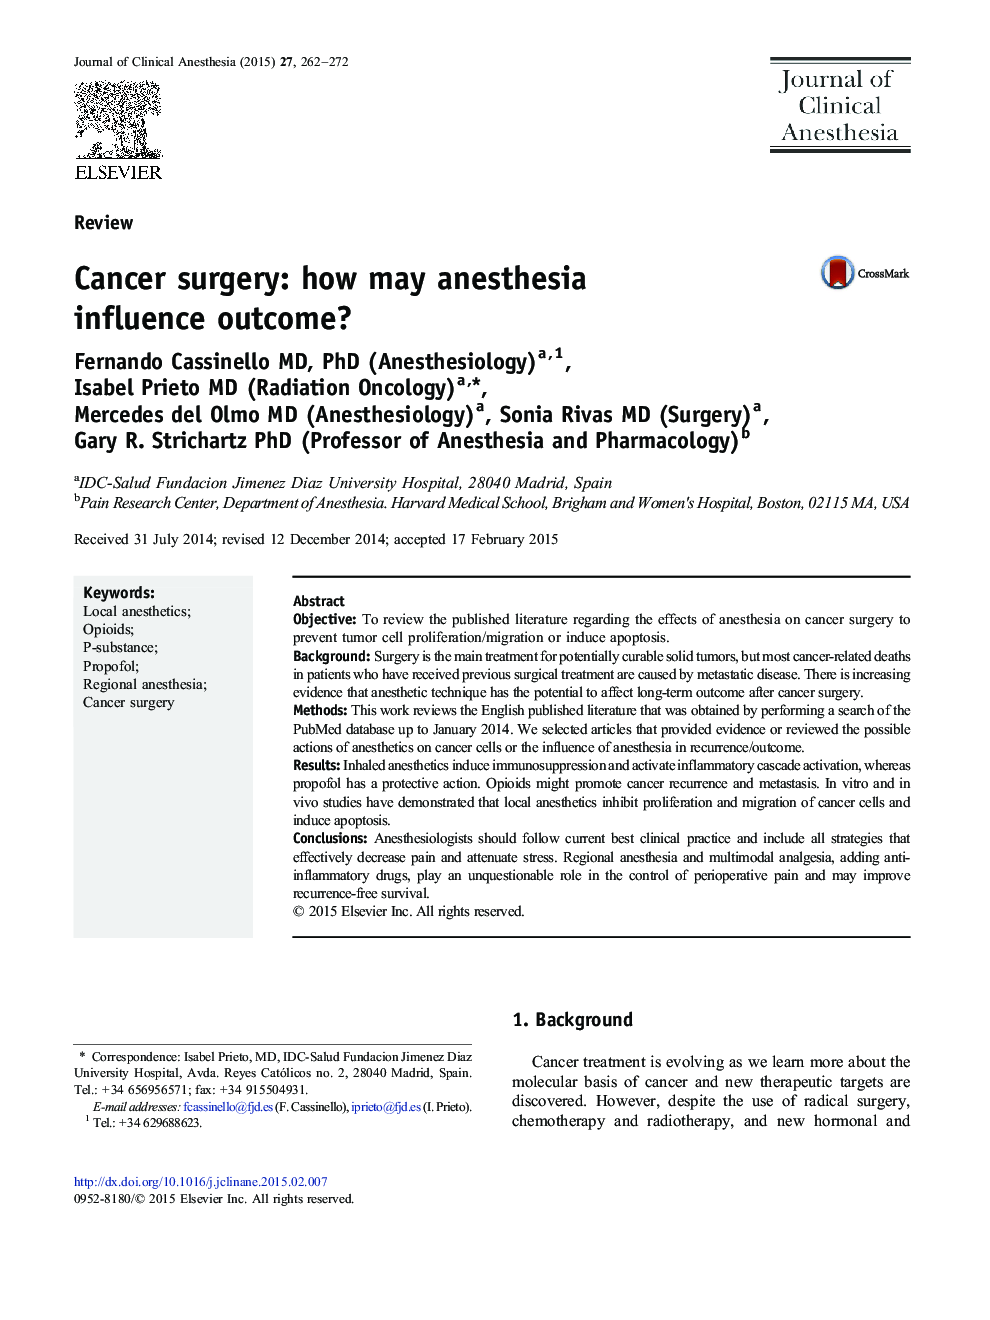 Cancer surgery: how may anesthesia influence outcome?